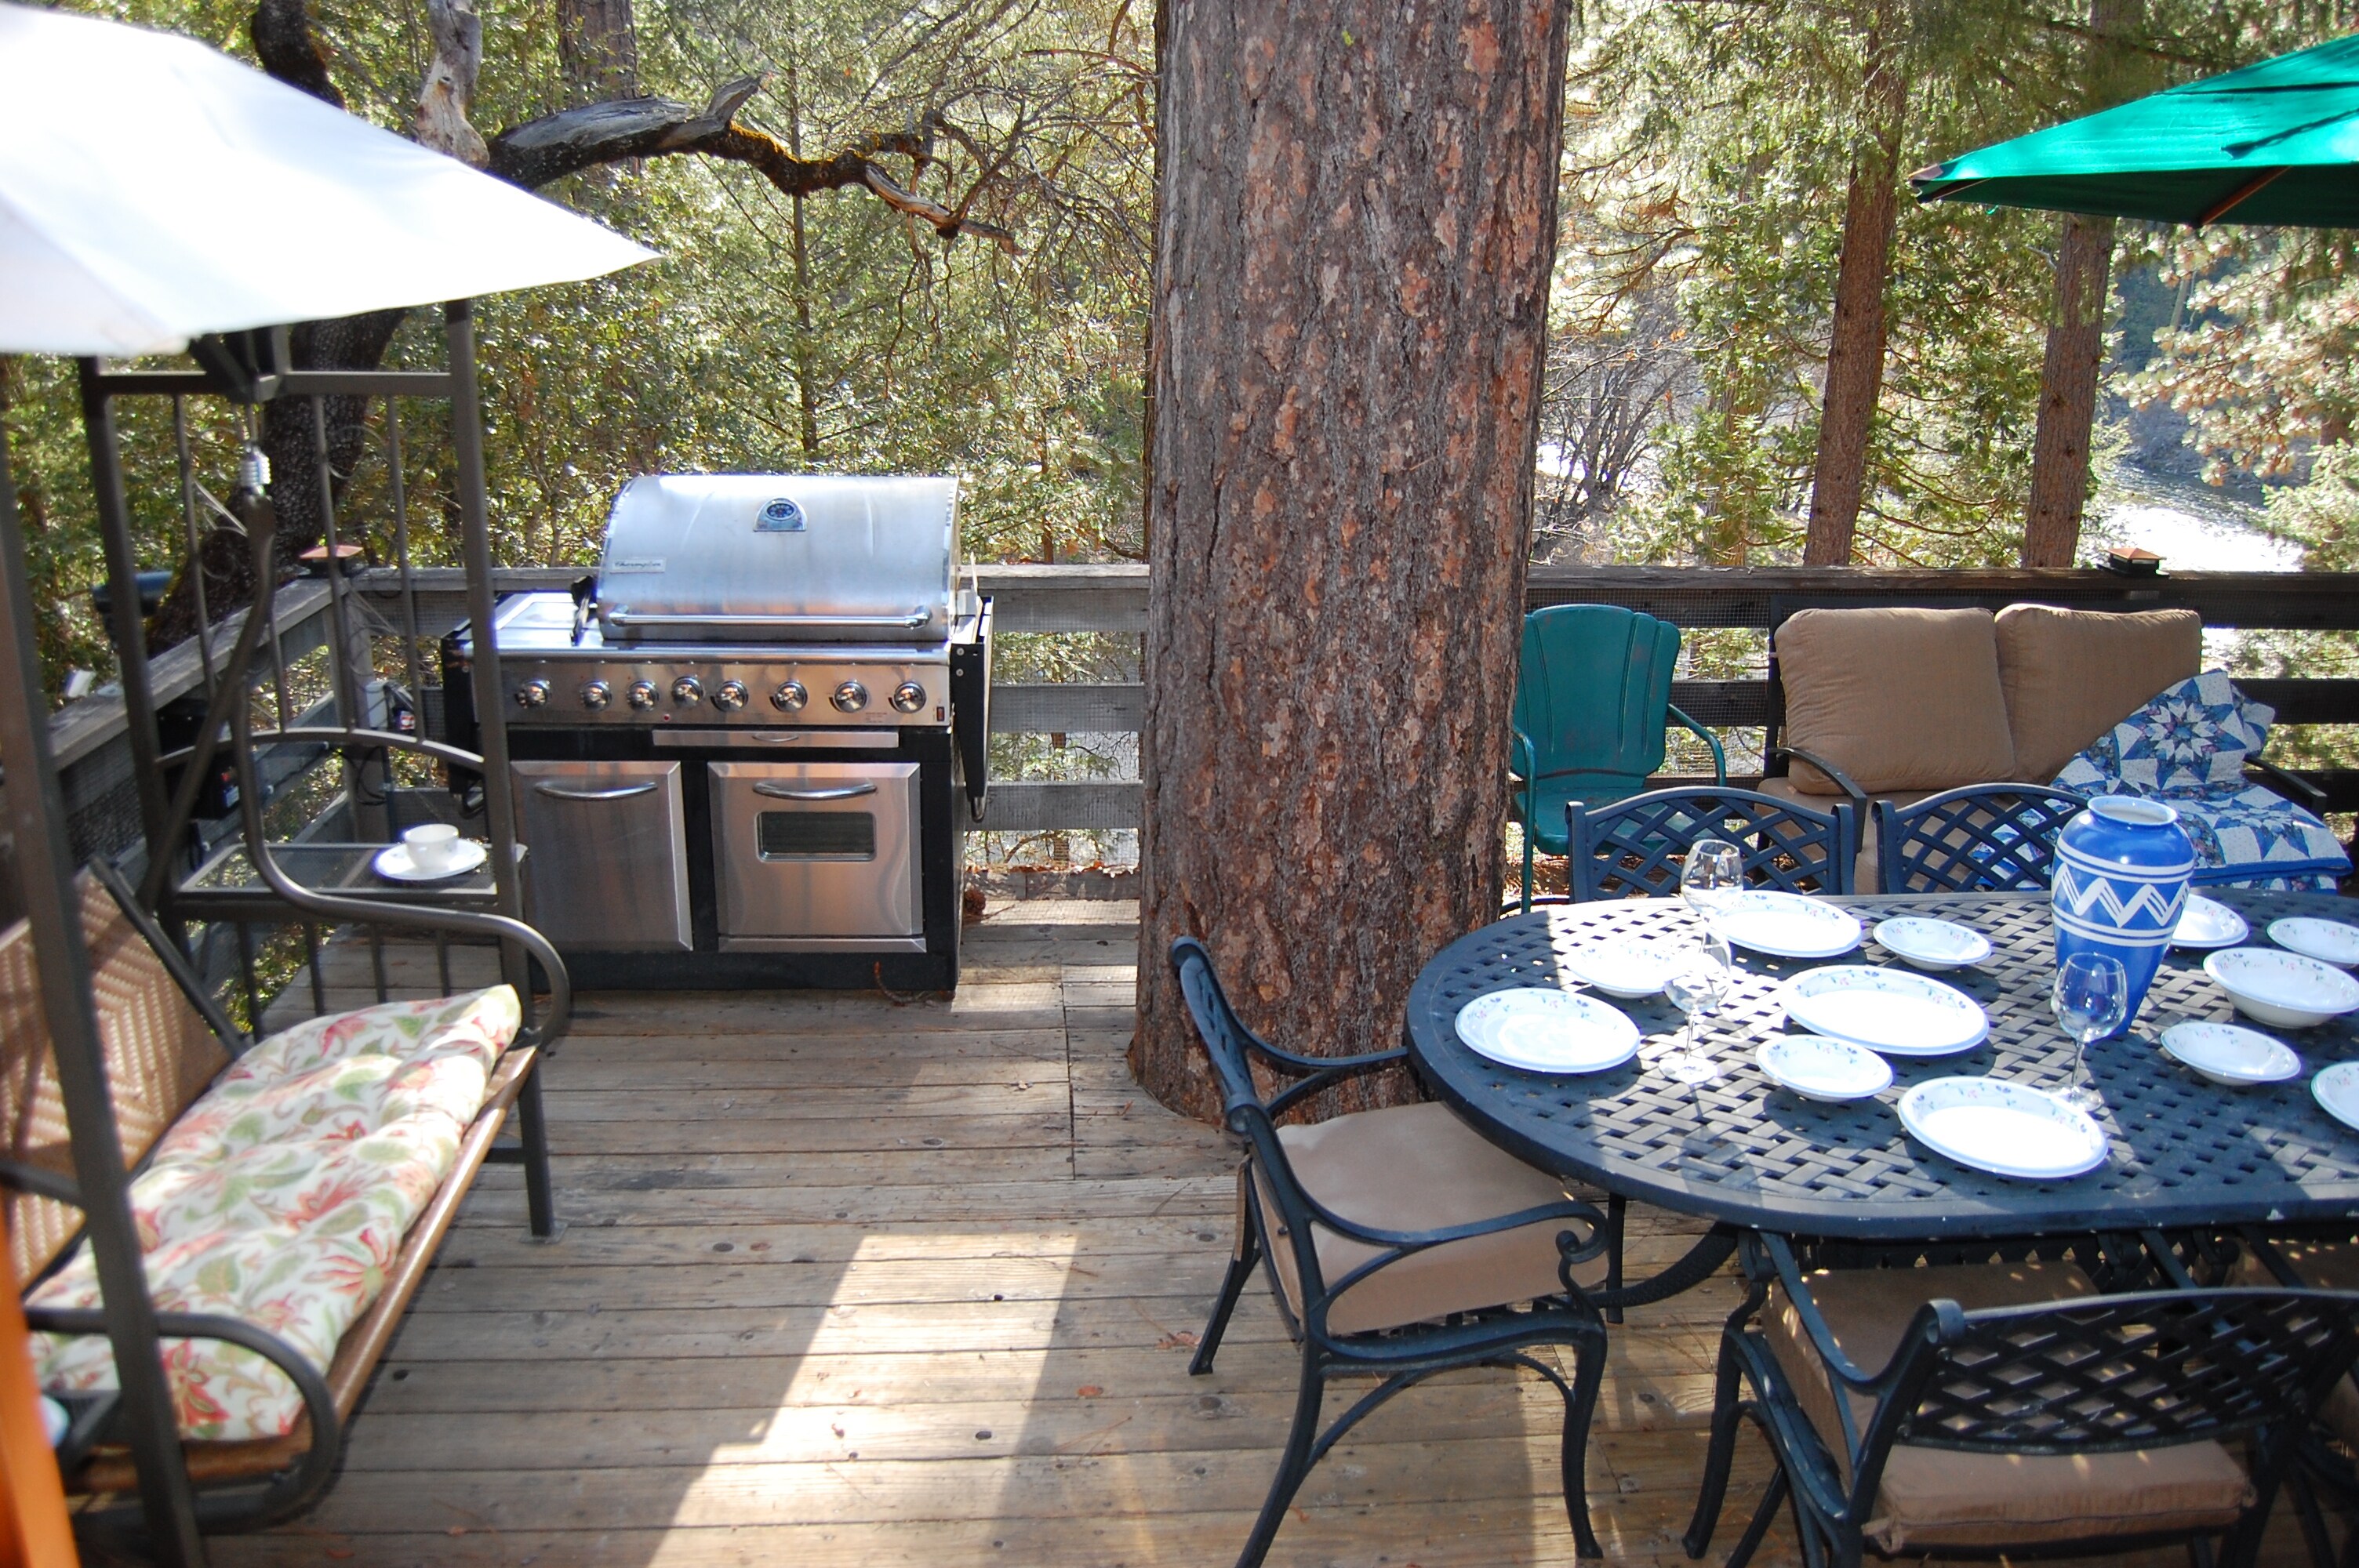 Covered swing, large gas grill, picnic table for 6, and the south fork of the Merced River too!